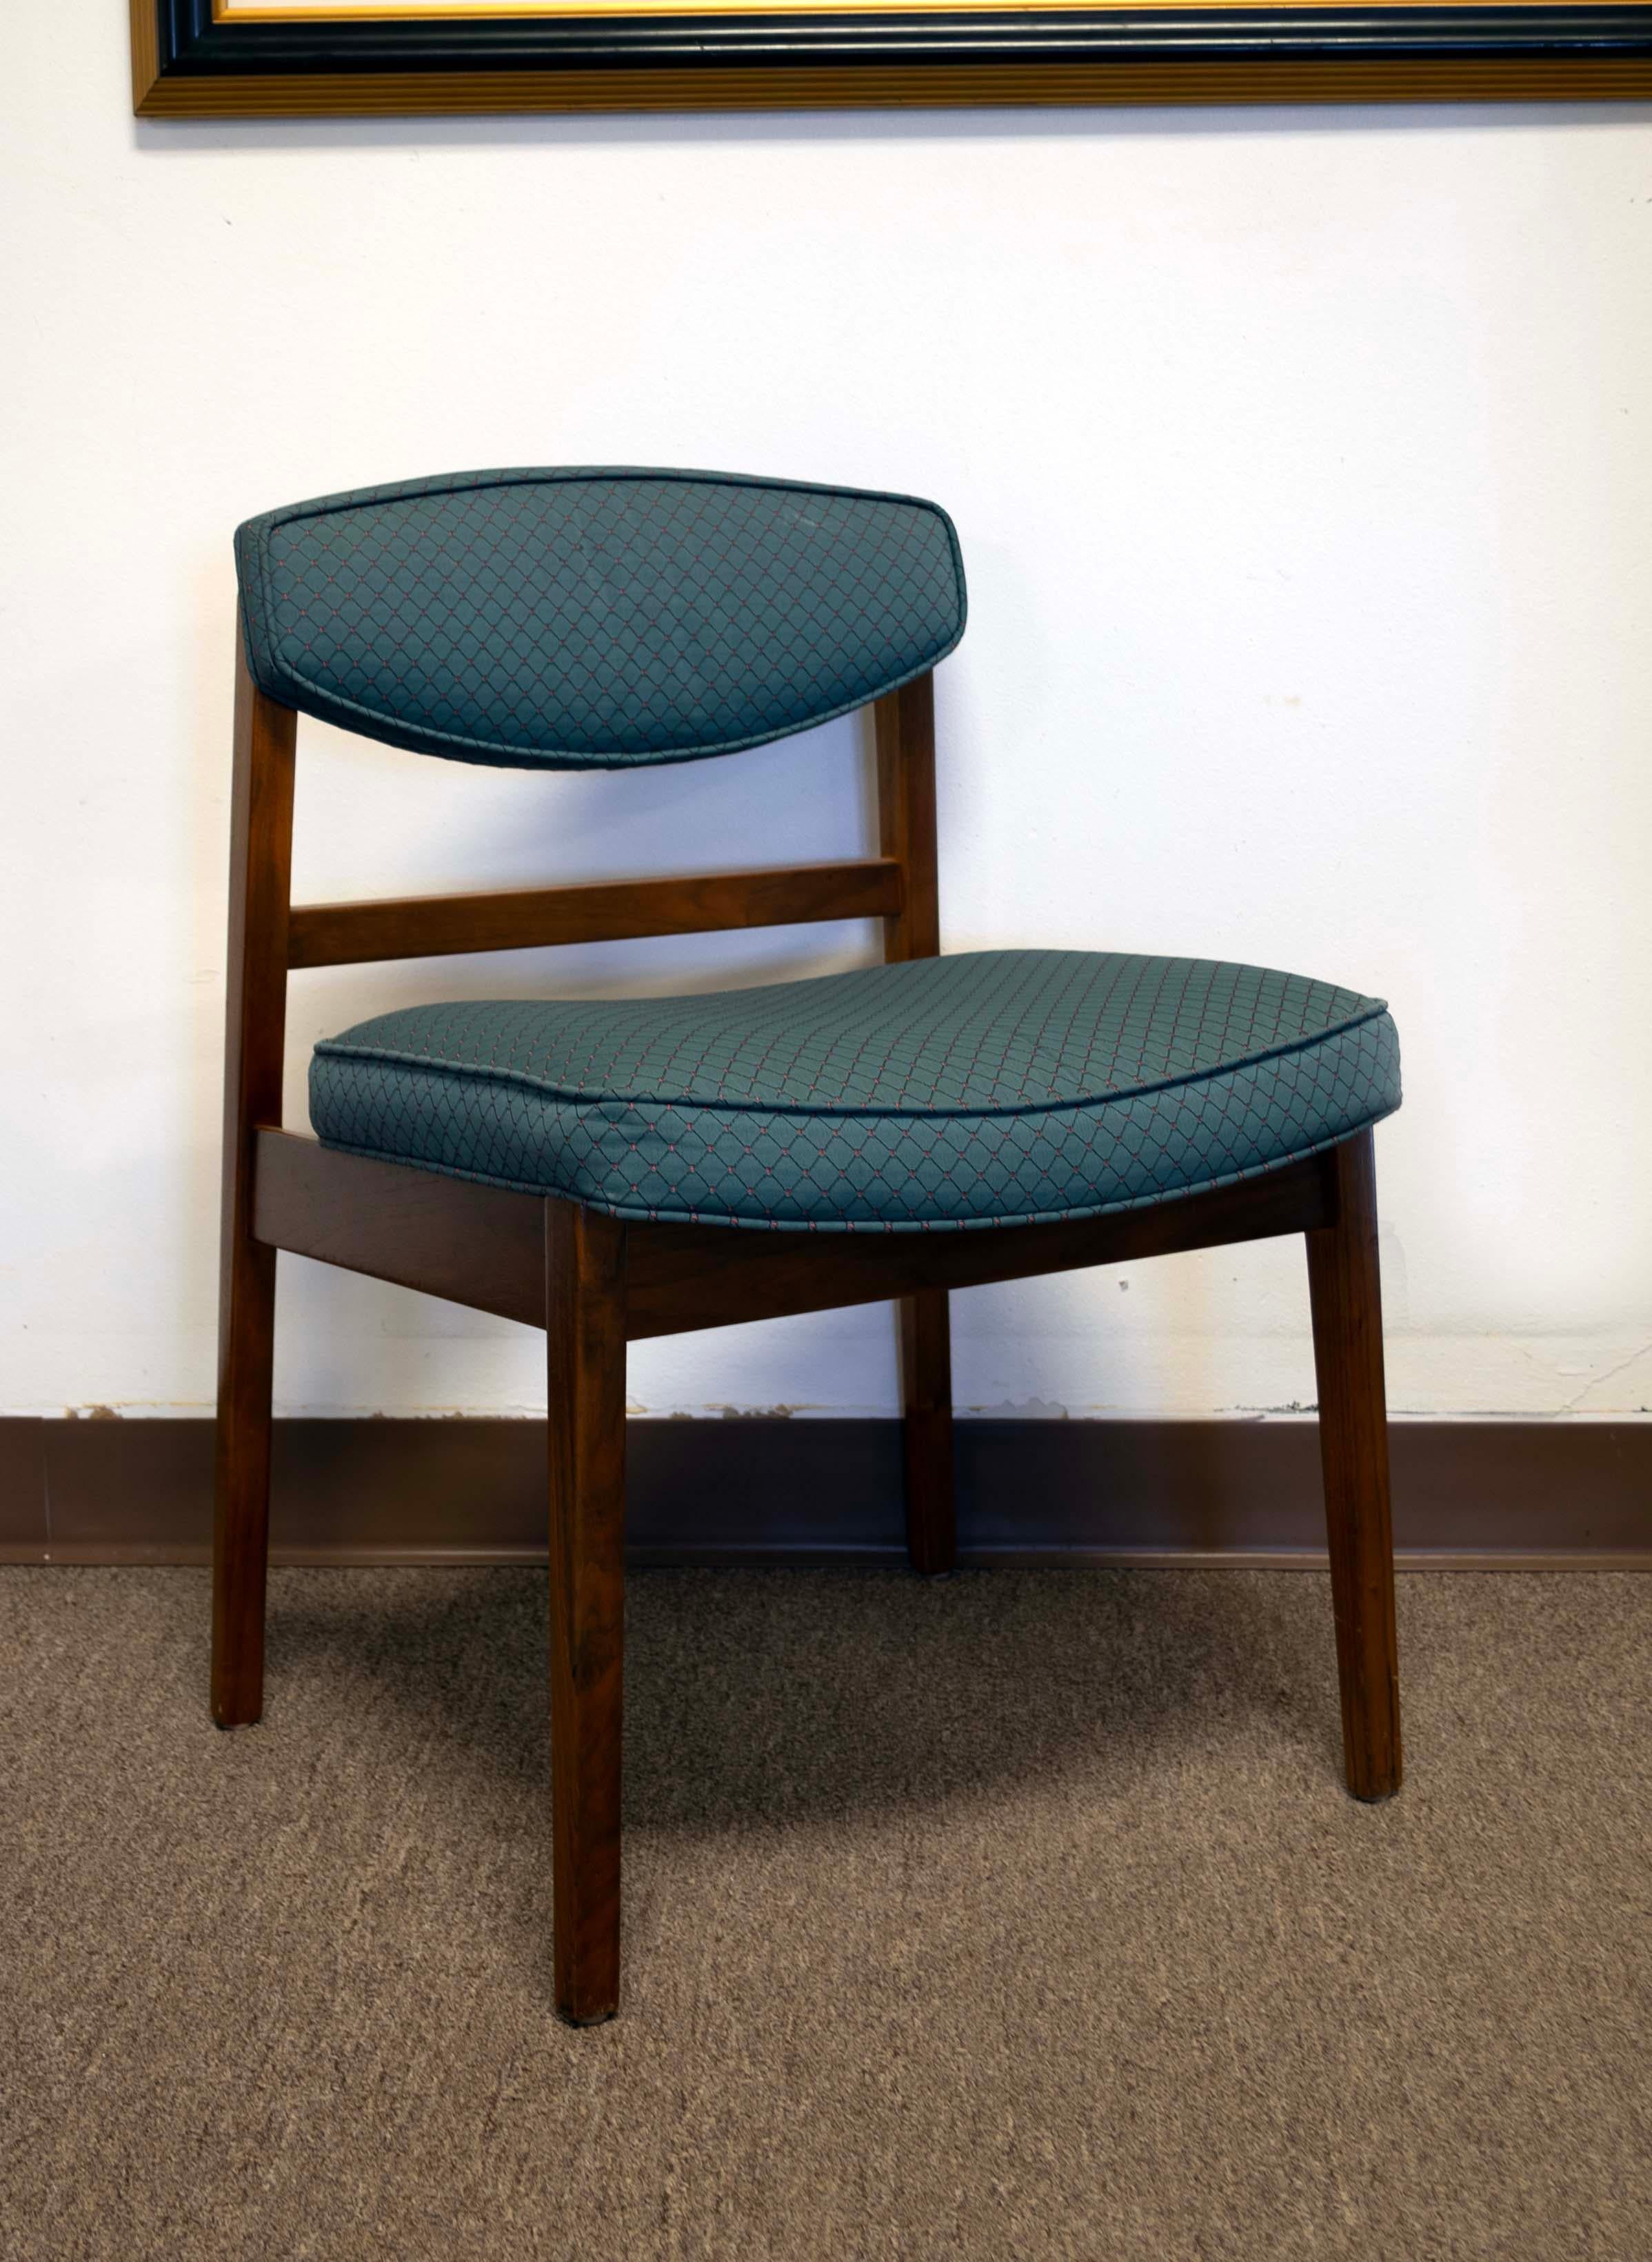 Set of 6 George Nelson for Herman Miller Mid Century Modern Walnut Chairs In Good Condition For Sale In Keego Harbor, MI